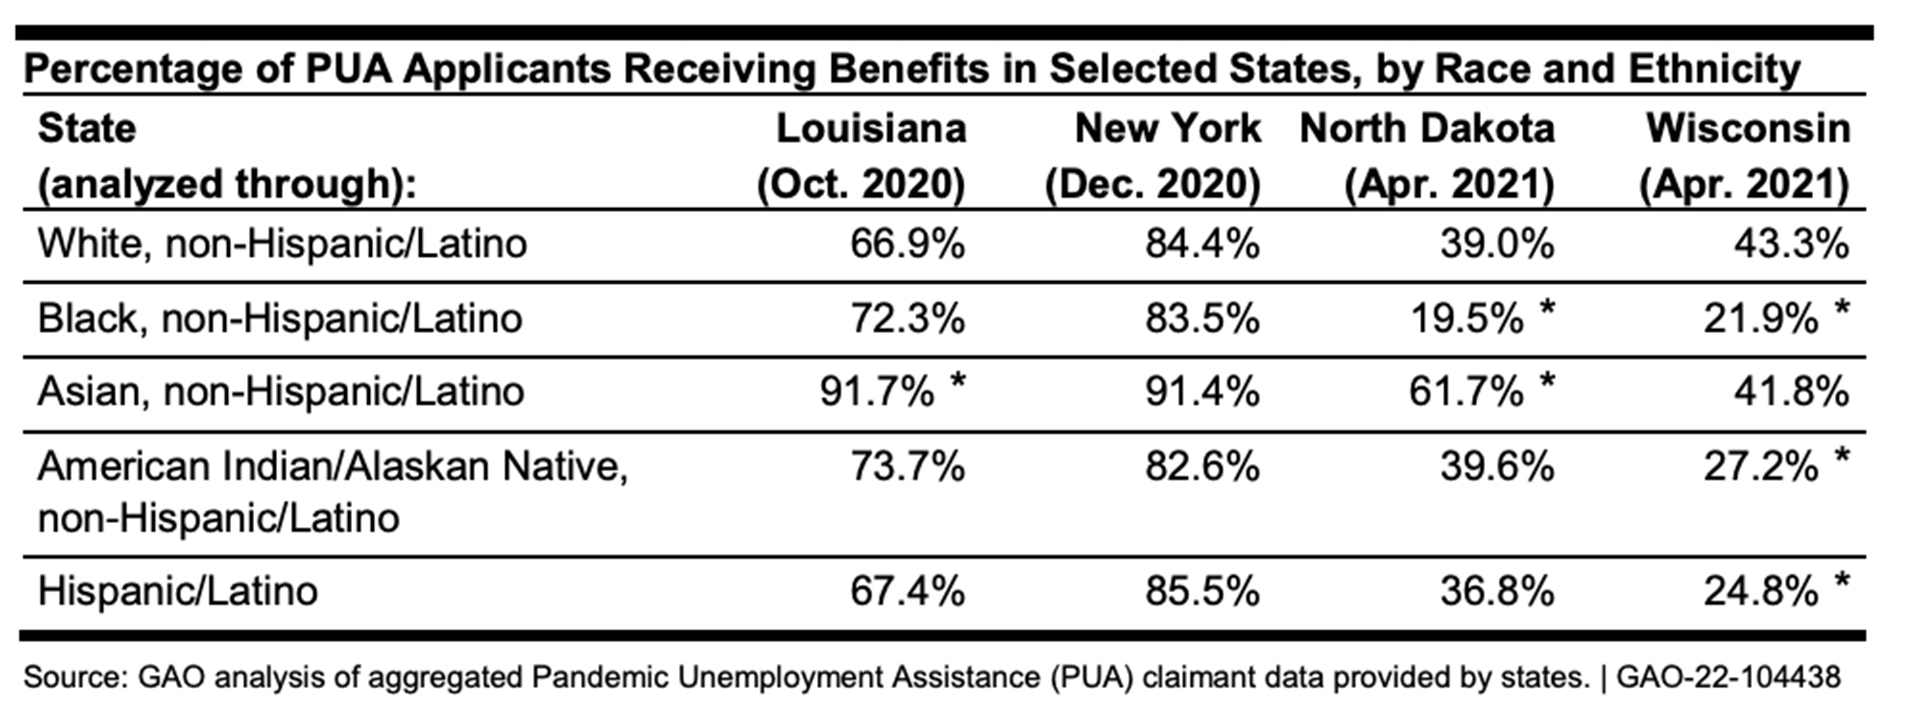 A table displays the percentage of pandemic unemployment assistance applicants who received benefits in Louisiana, New York, North Dakota and Wisconsin, by race and ethnicity